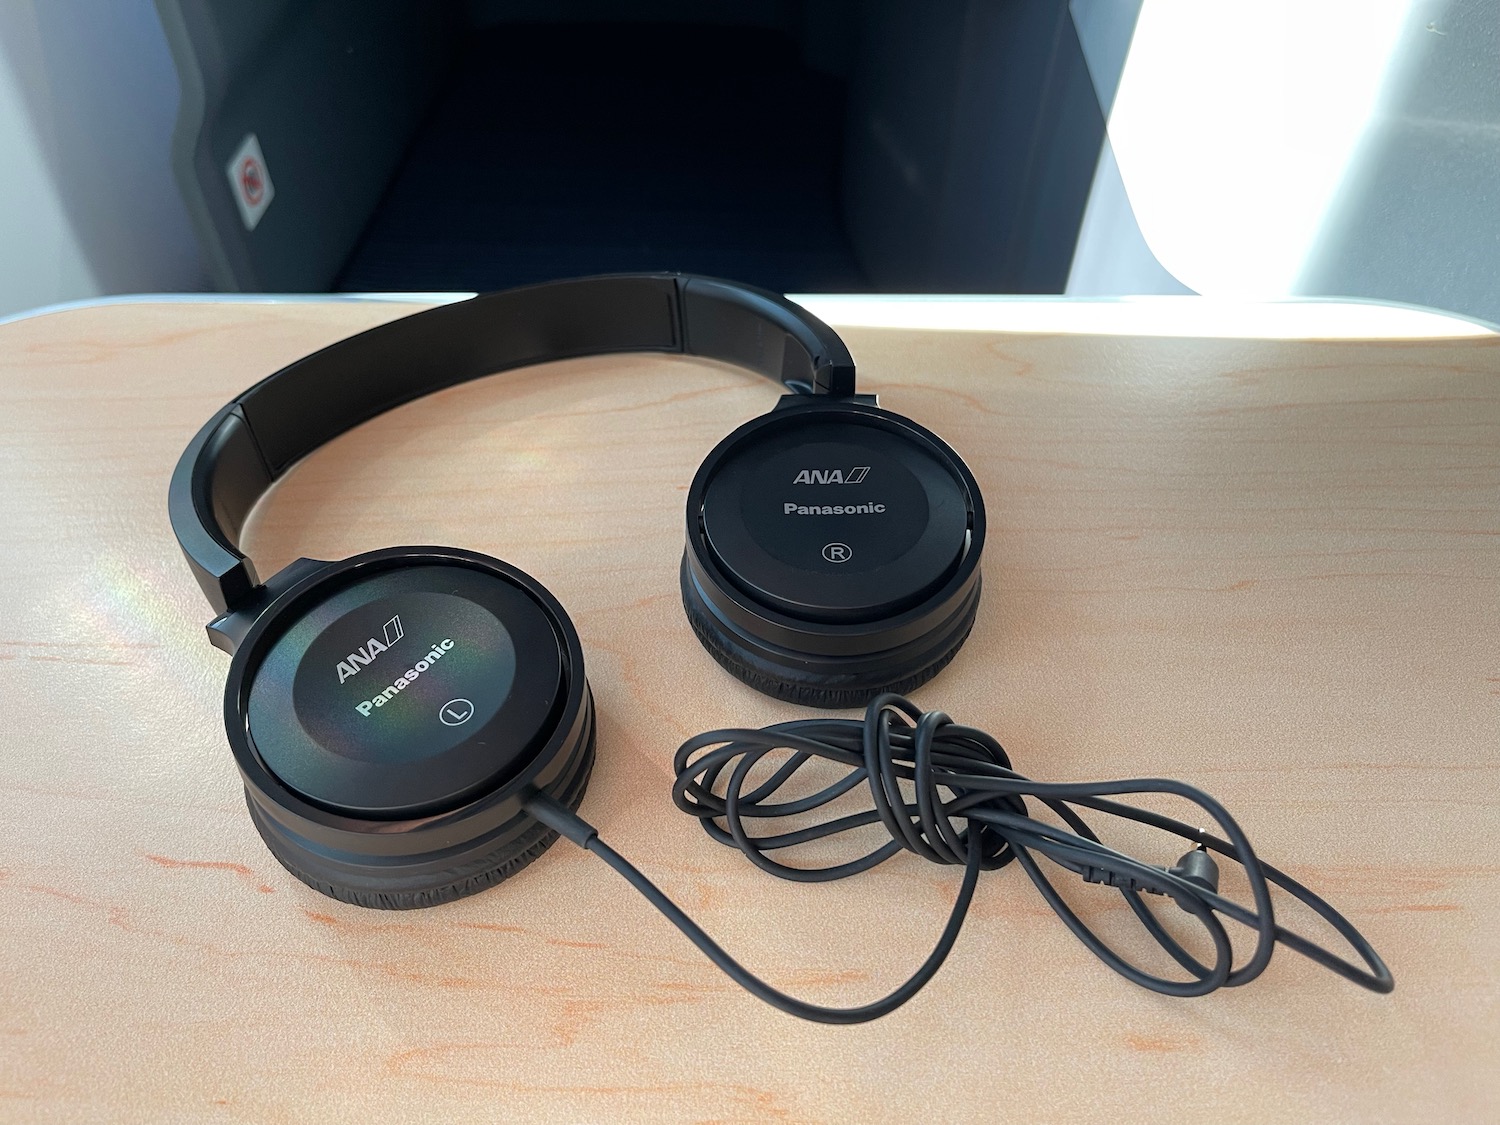 a pair of black headphones on a wood surface